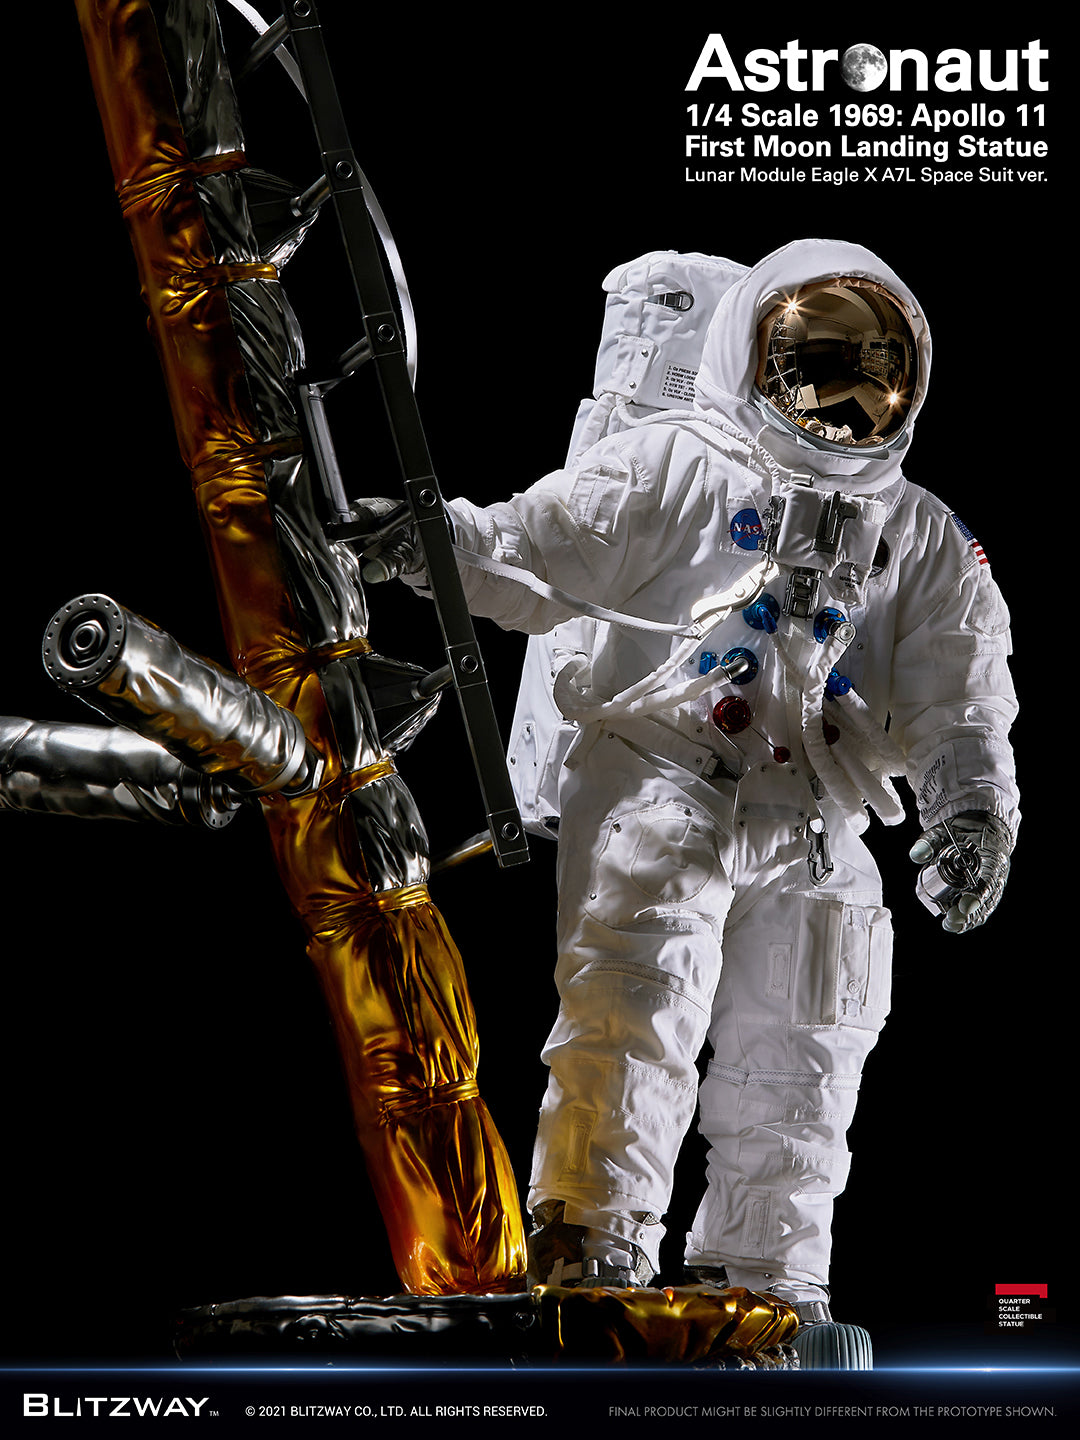 Blitzway - Superb Scale Statue (Hybrid Type) - 1969: Apollo 11 First Moon Landing - Astronaut Statue (LM-5 A7L Space Suit Ver.) (1/4 Scale) - Marvelous Toys